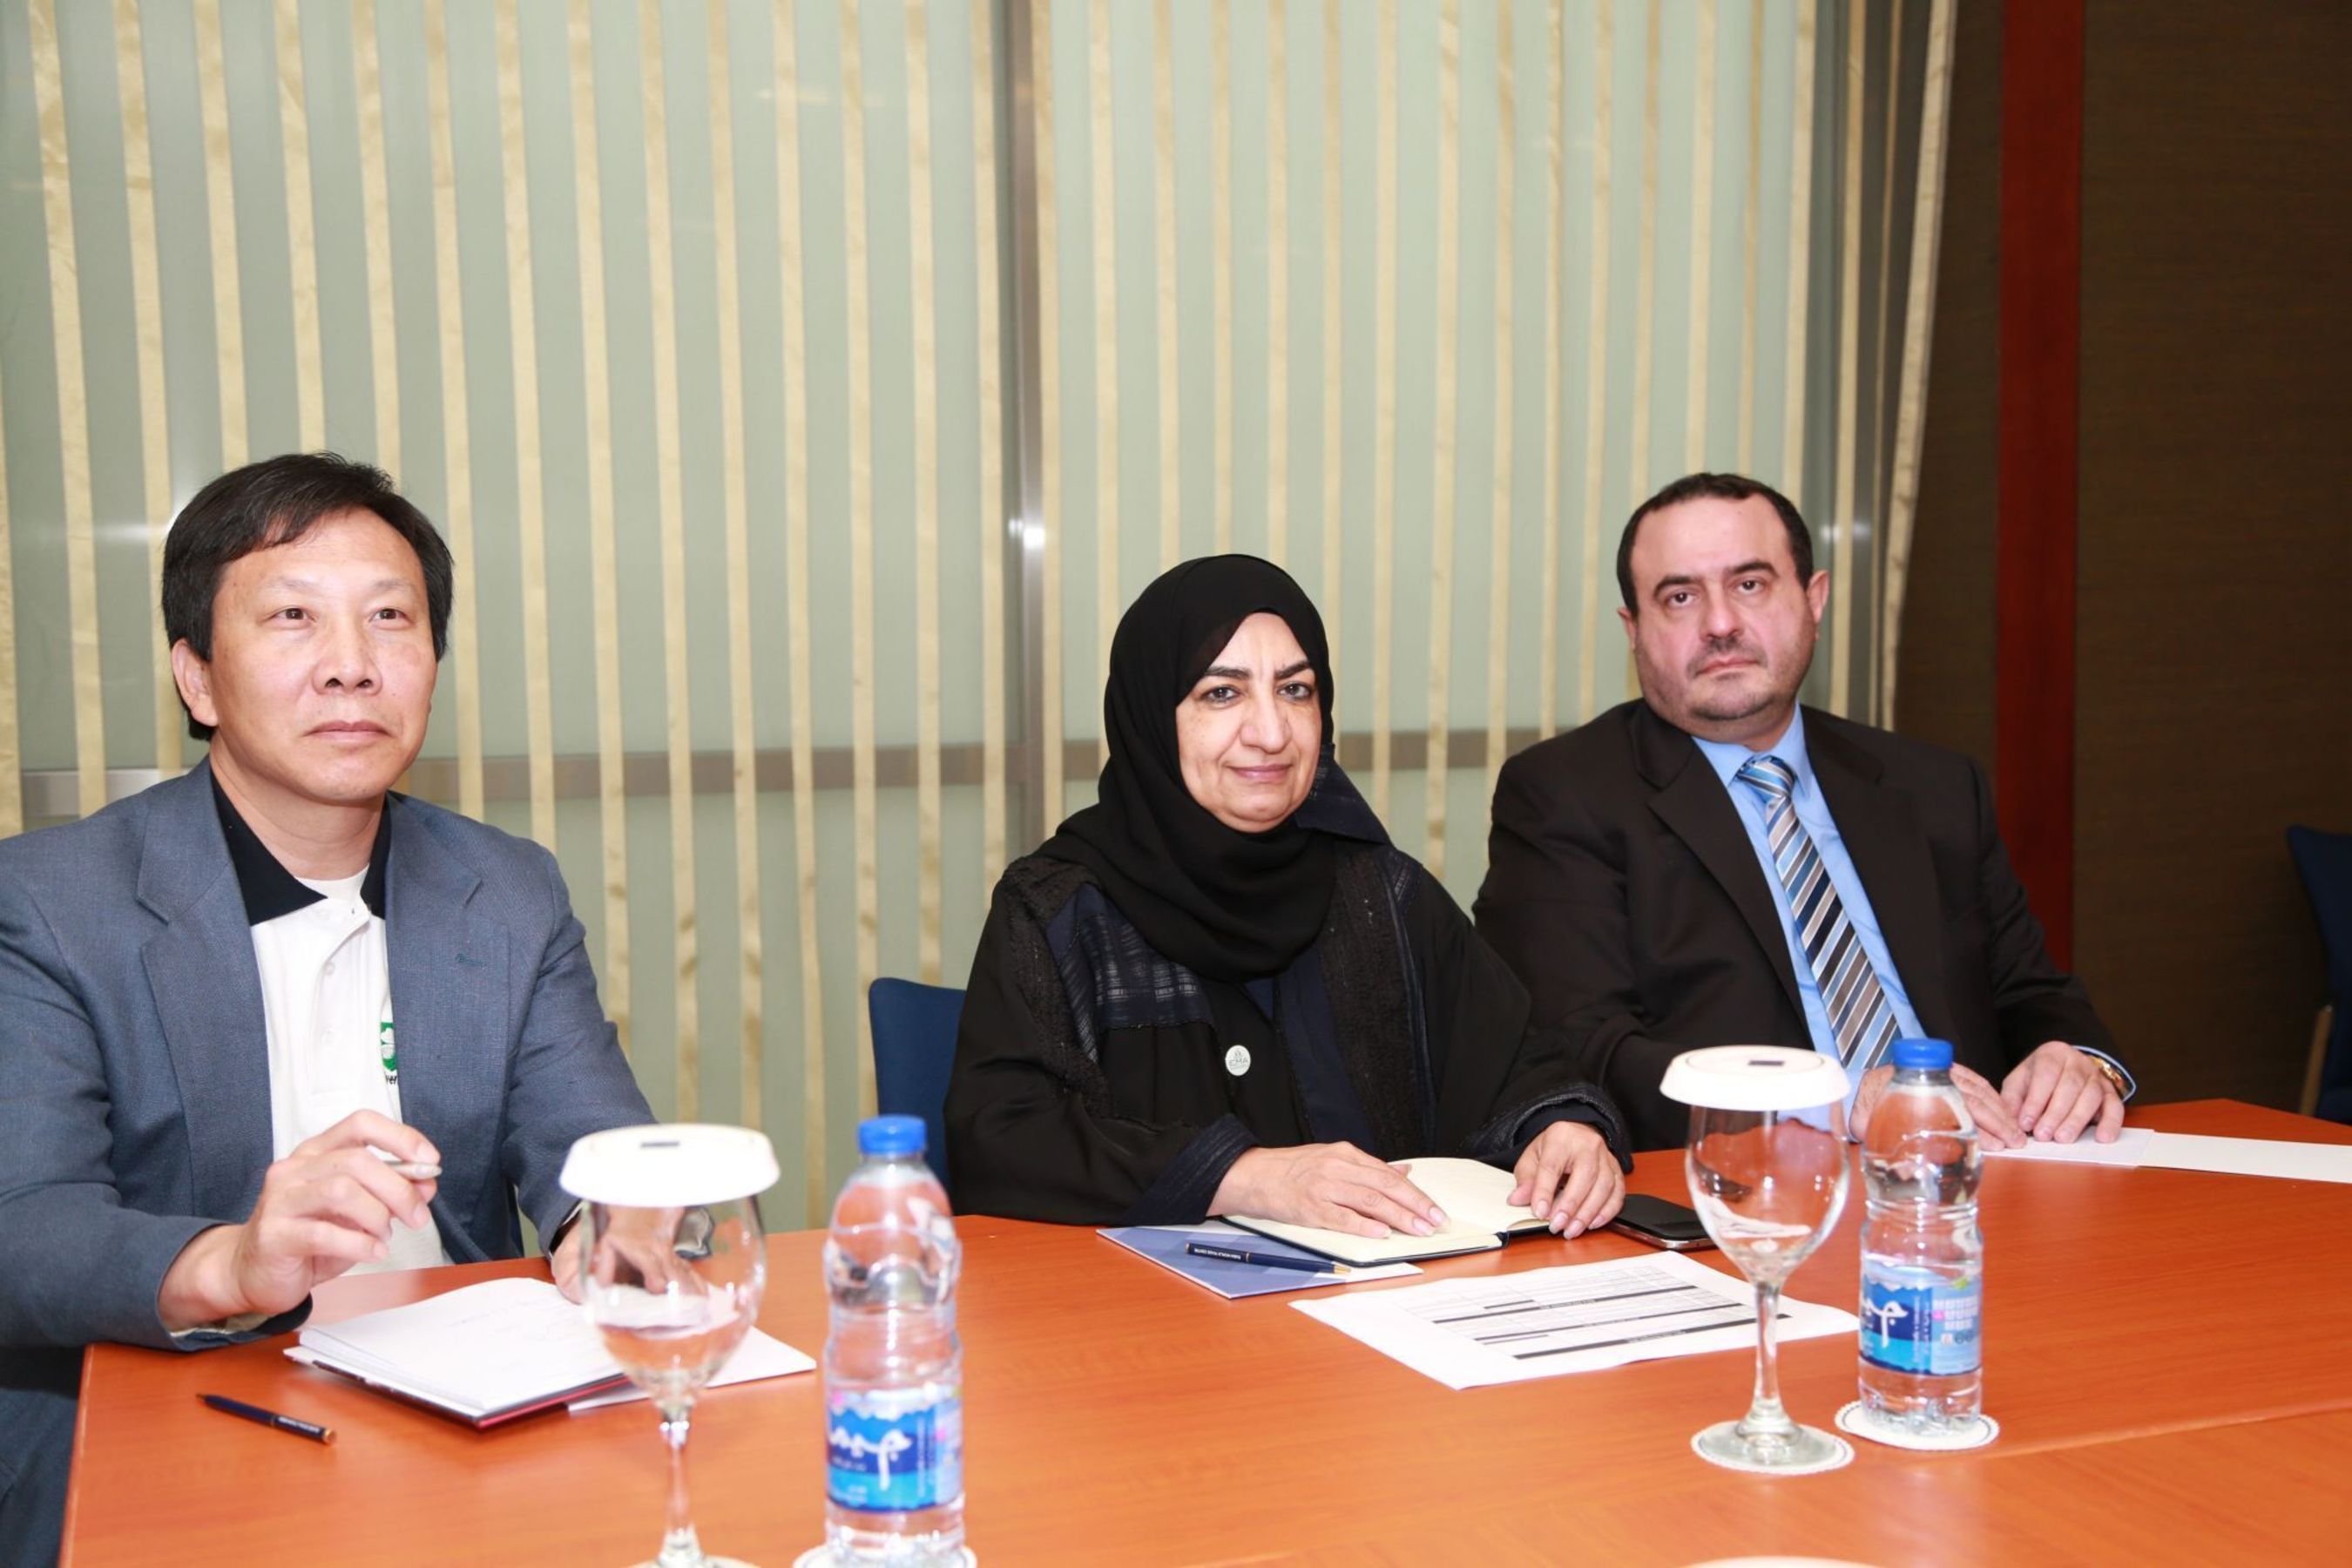 ESPC 2015 organising committee members during their meeting, from left : Dr. Aaron Han, Dr. Mouza Al Sharhan, Dr. Hassan Hotait of the Emirates Pathology Society (PRNewsFoto/Emirates Pathology Society (EPS))